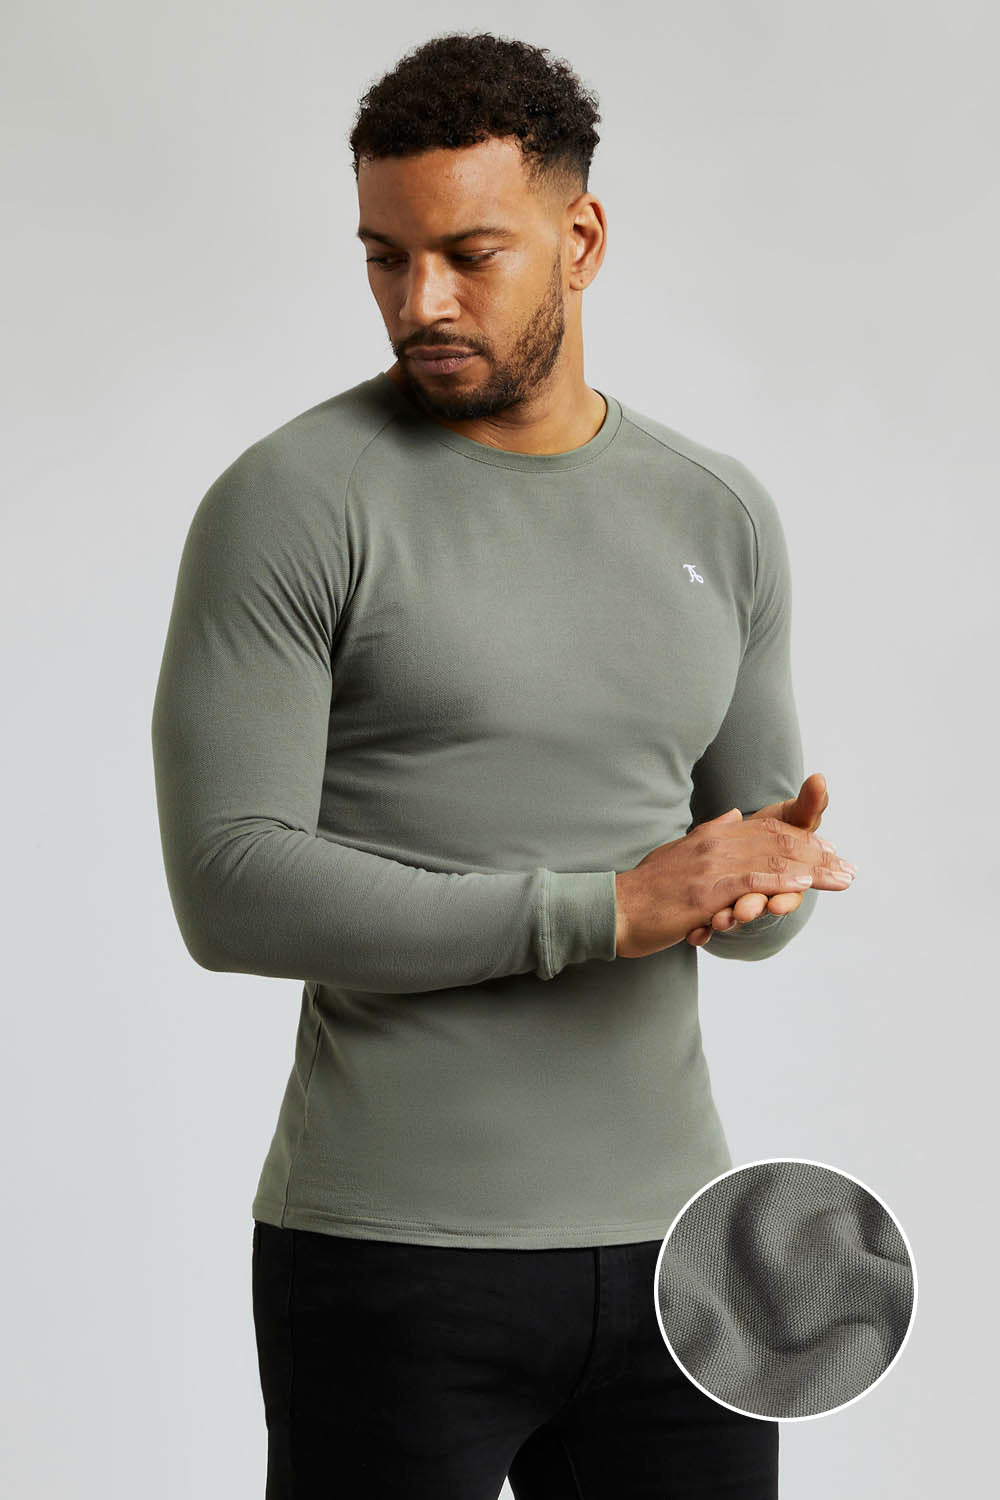 Pique T-Shirt Long Sleeve in Muted Khaki - TAILORED ATHLETE - USA